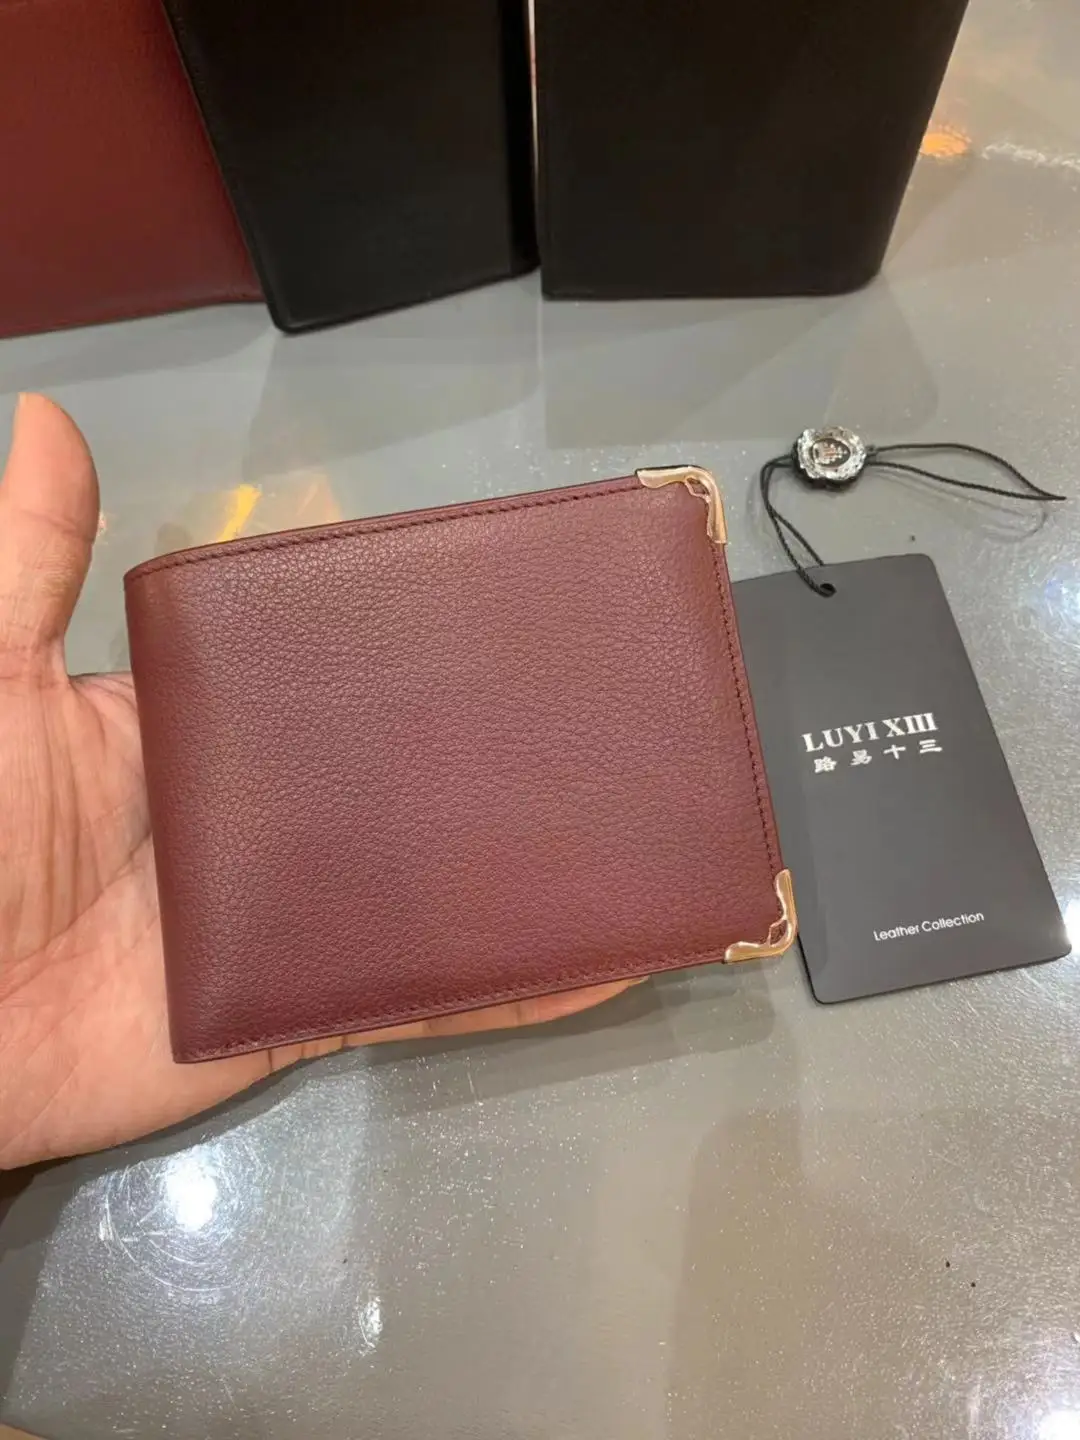 Luxury brand men s cowhide short wallet classic series multi-card position fashion leisure high quality leather wallet LUYI XIII